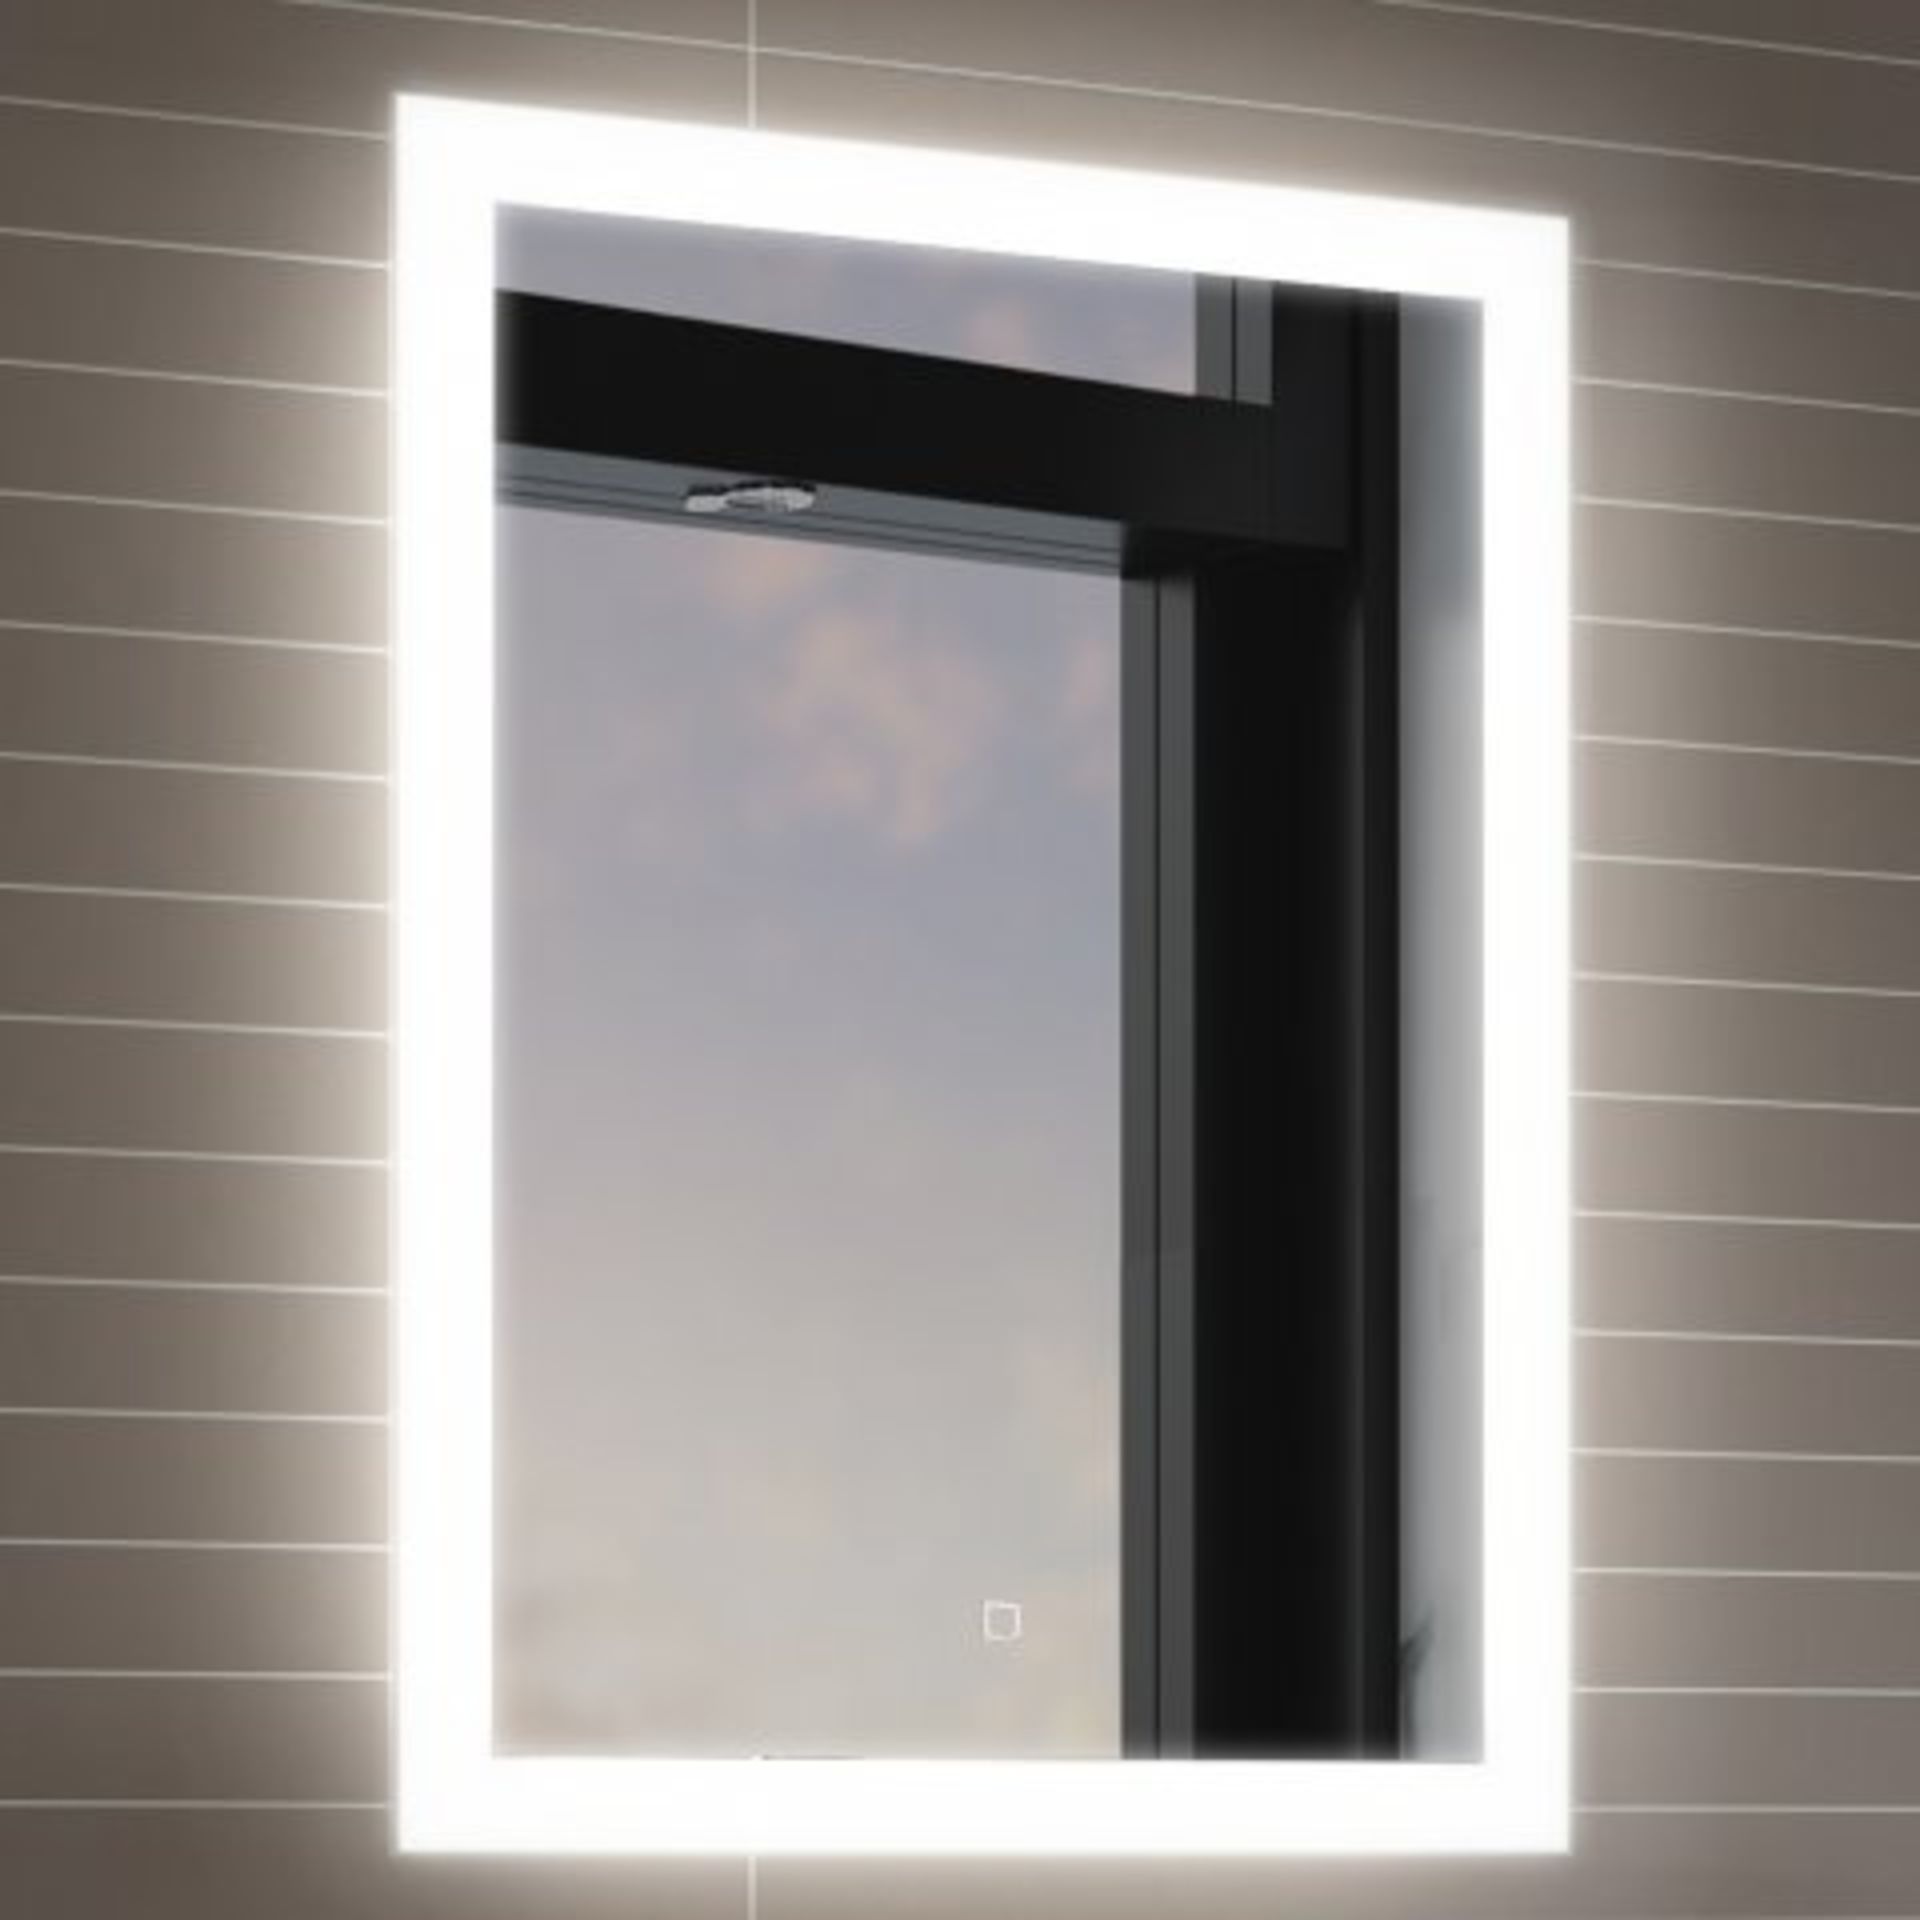 (P36) 700x500mm Orion Illuminated LED Mirror - Switch Control RRP £399.99. Light up your bathroom